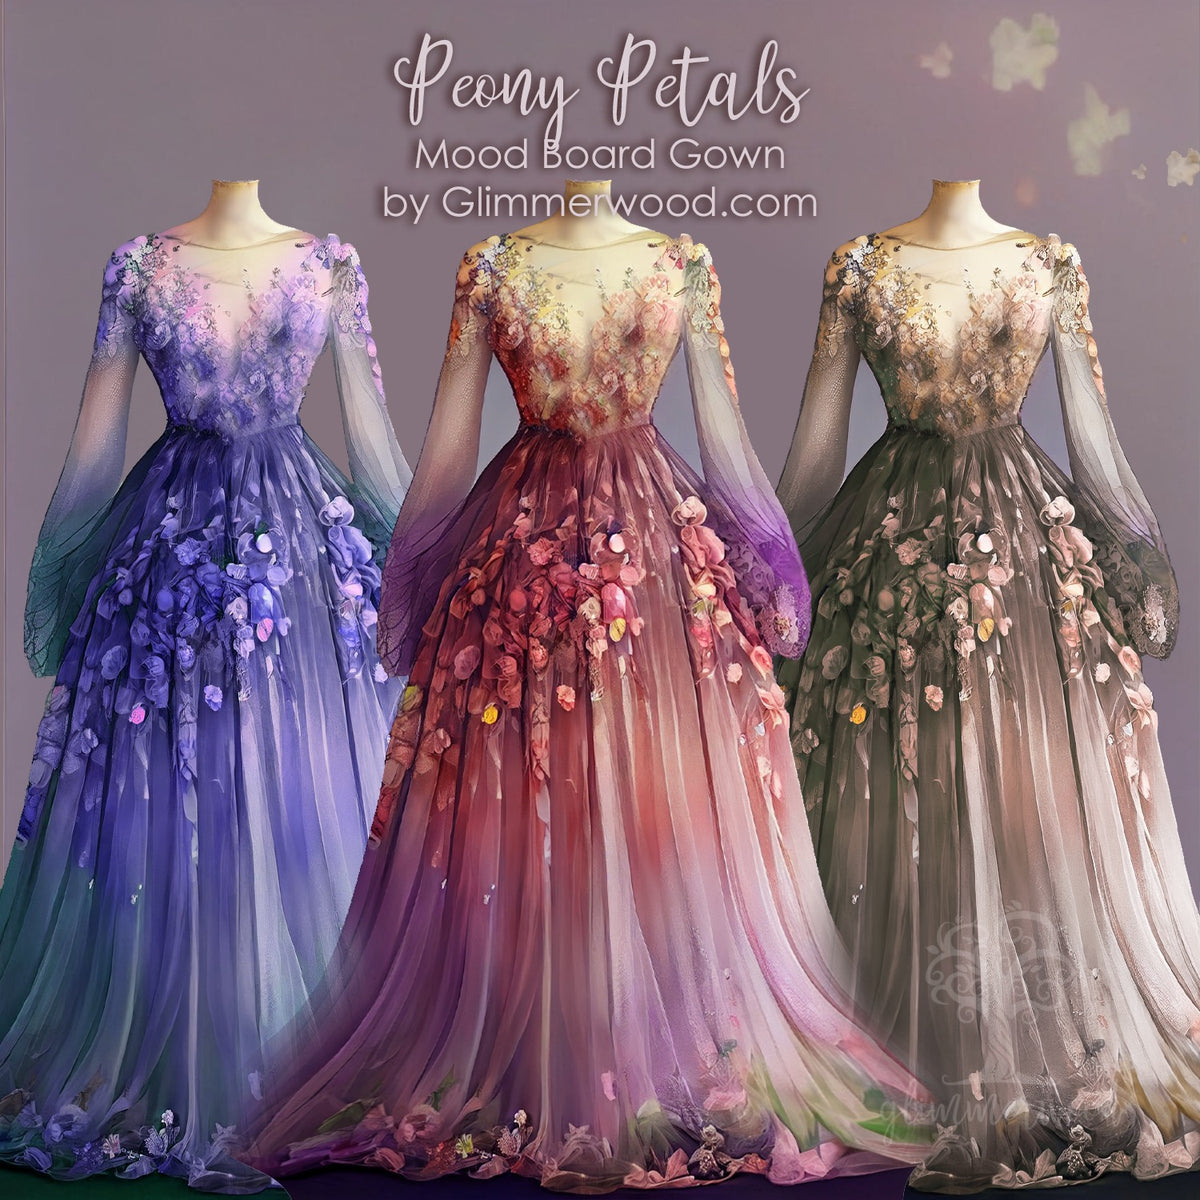 Peony Petals - Limited-Edition Mood Board Gown